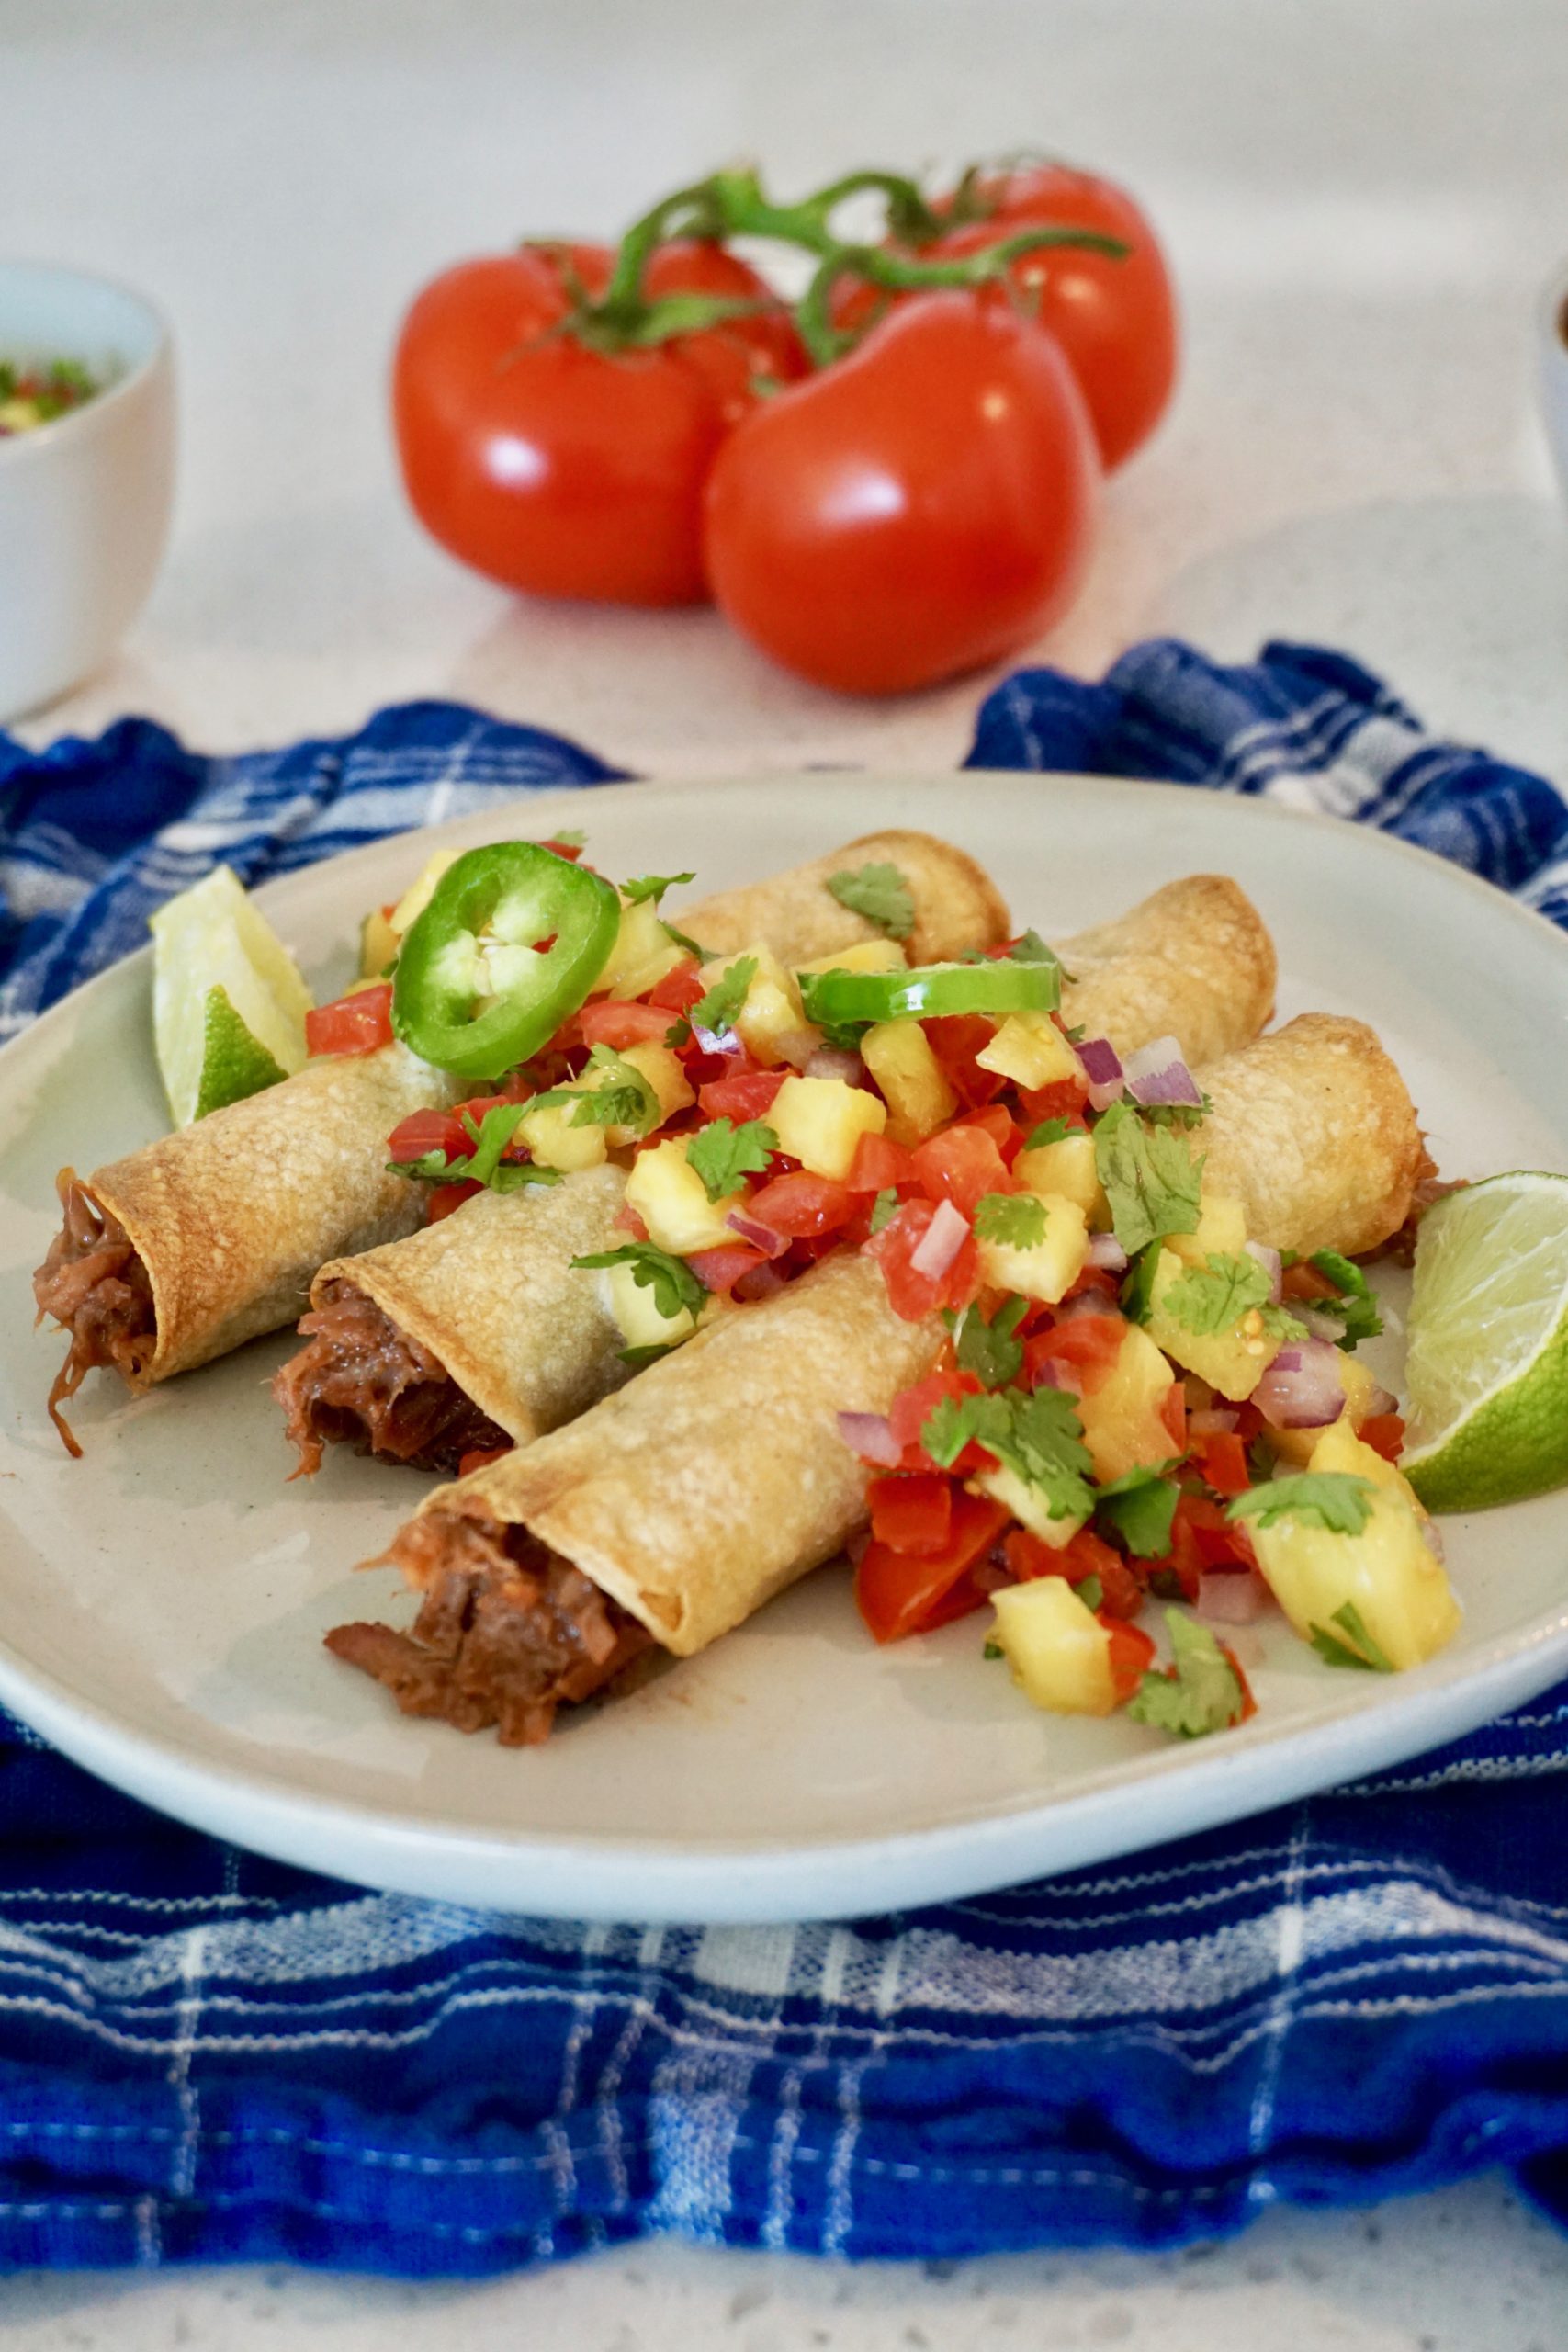 Pulled pork taquitos with pineapple salsa